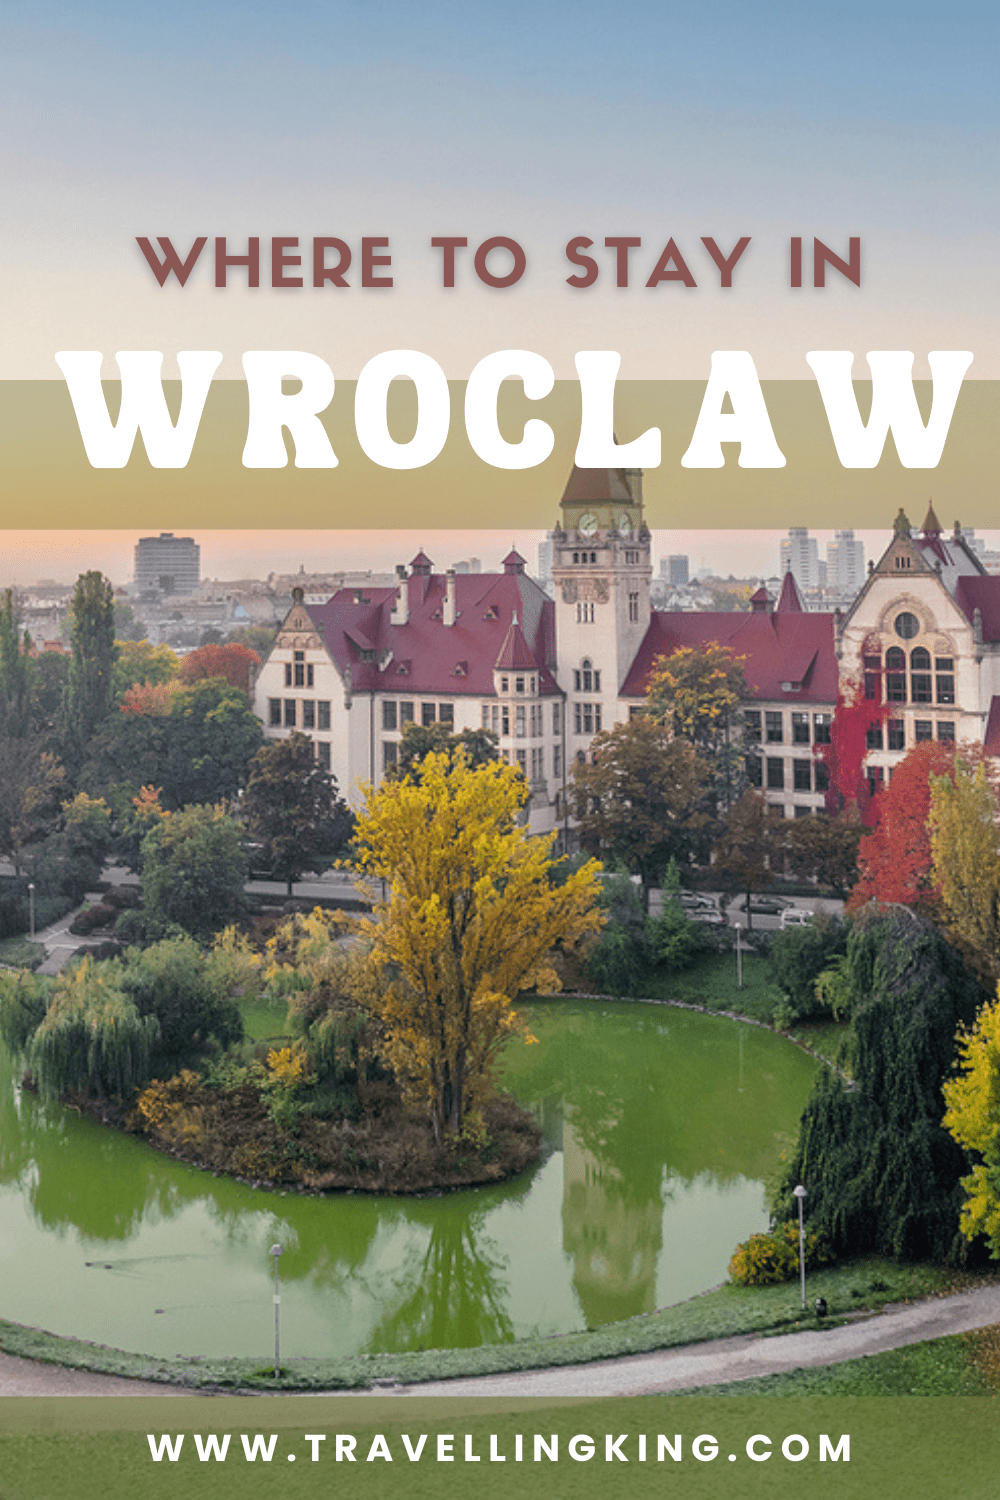 Where To Stay in Wroclaw